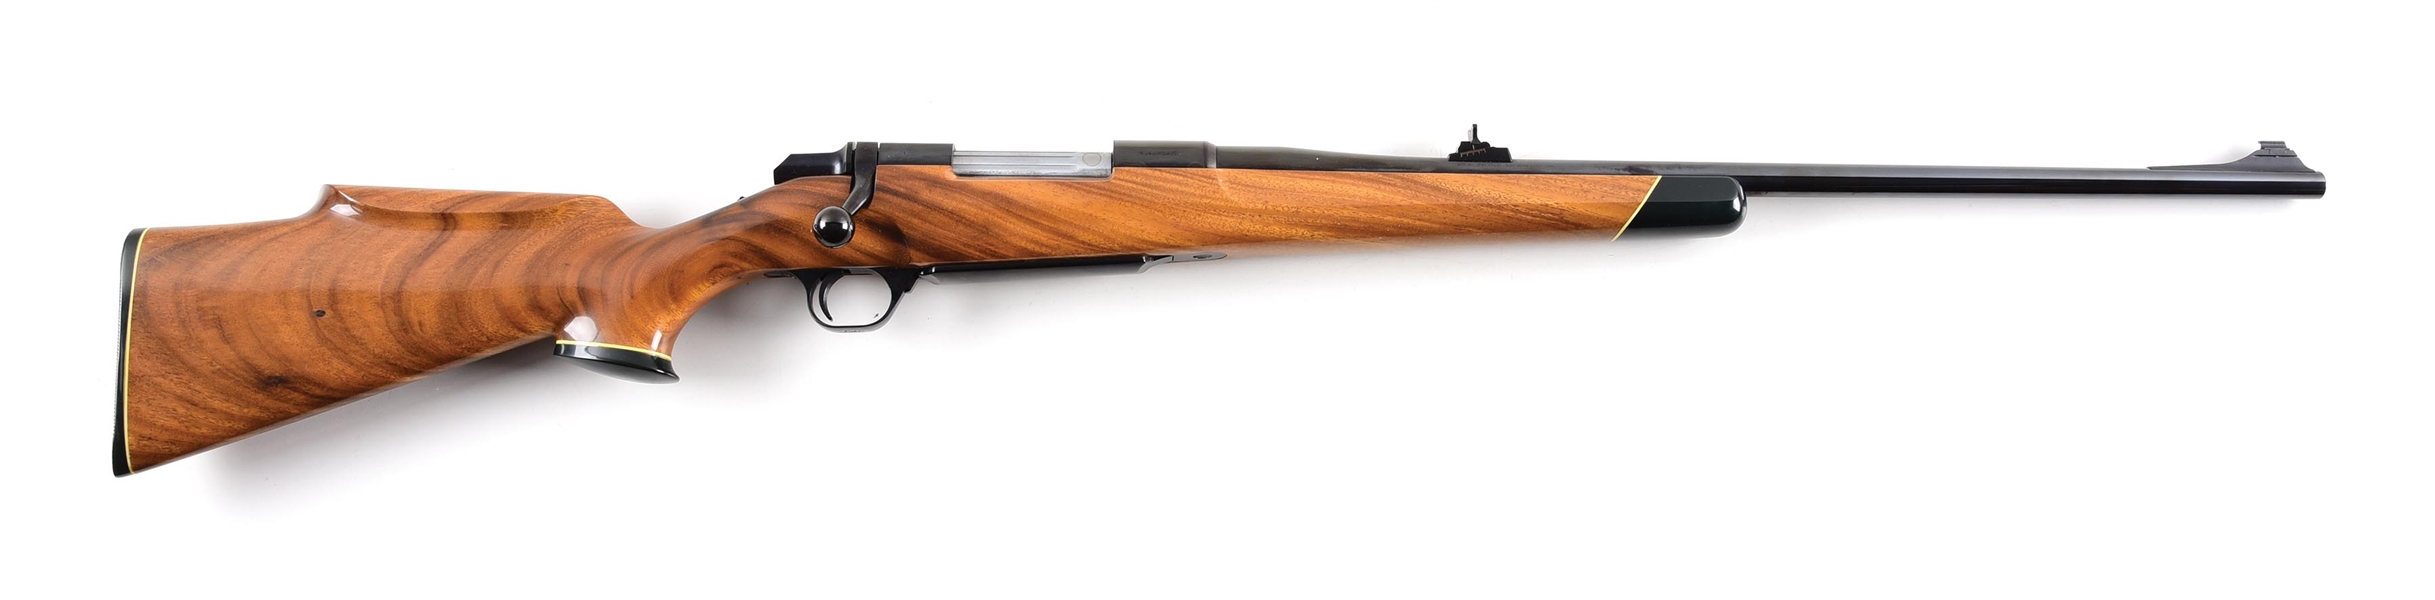 (M) BROWNING BBR BOLT ACTION RIFLE WITH GENICERO STOCK.